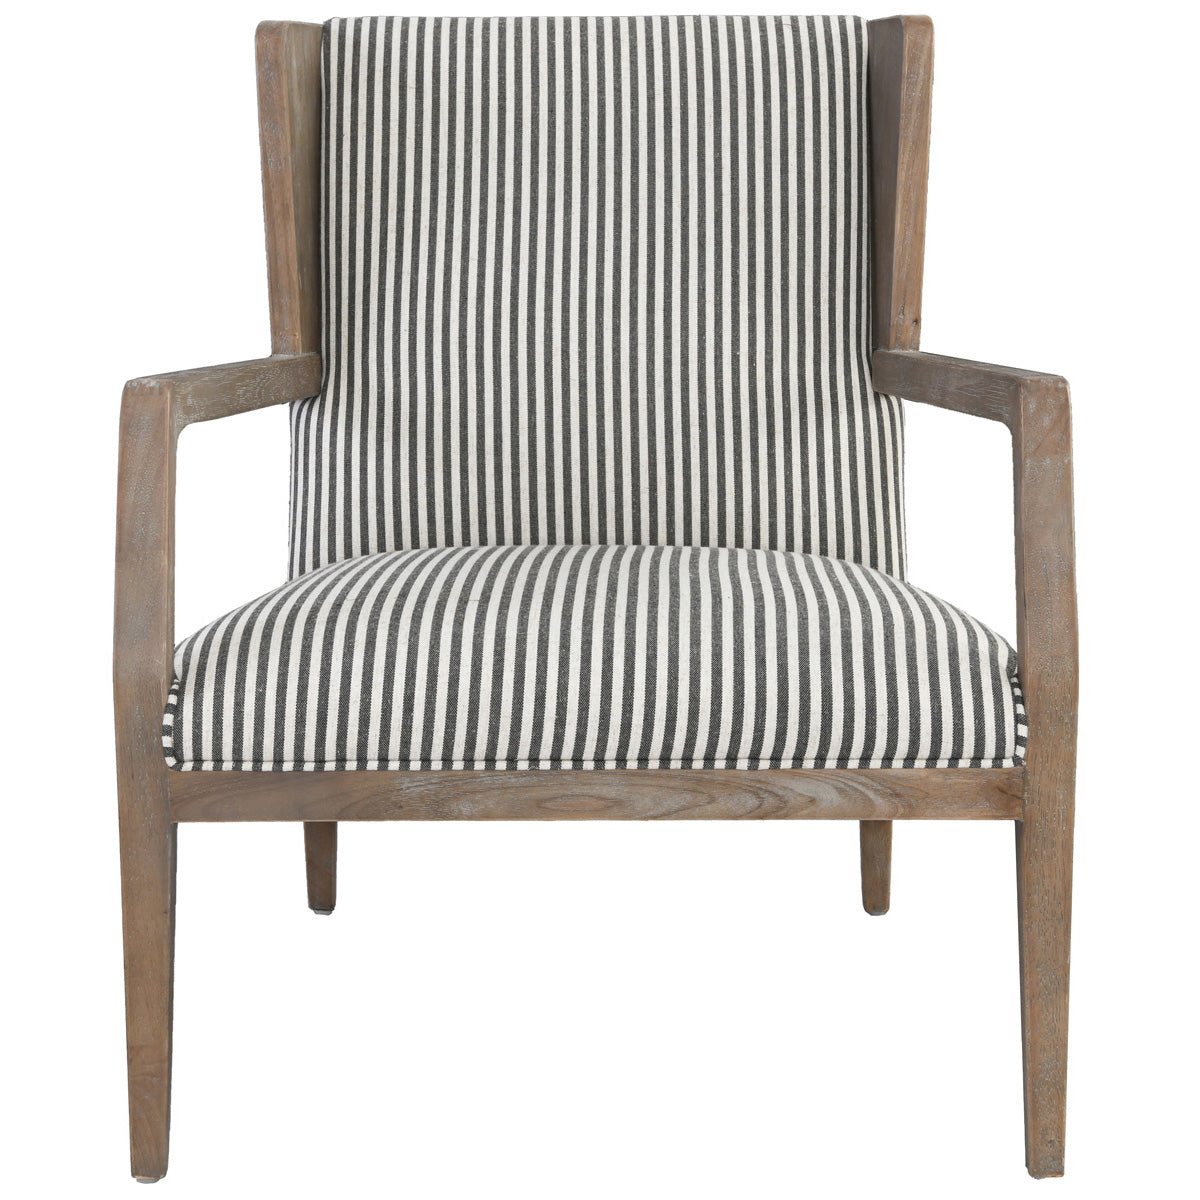 York Accent Chair Striped